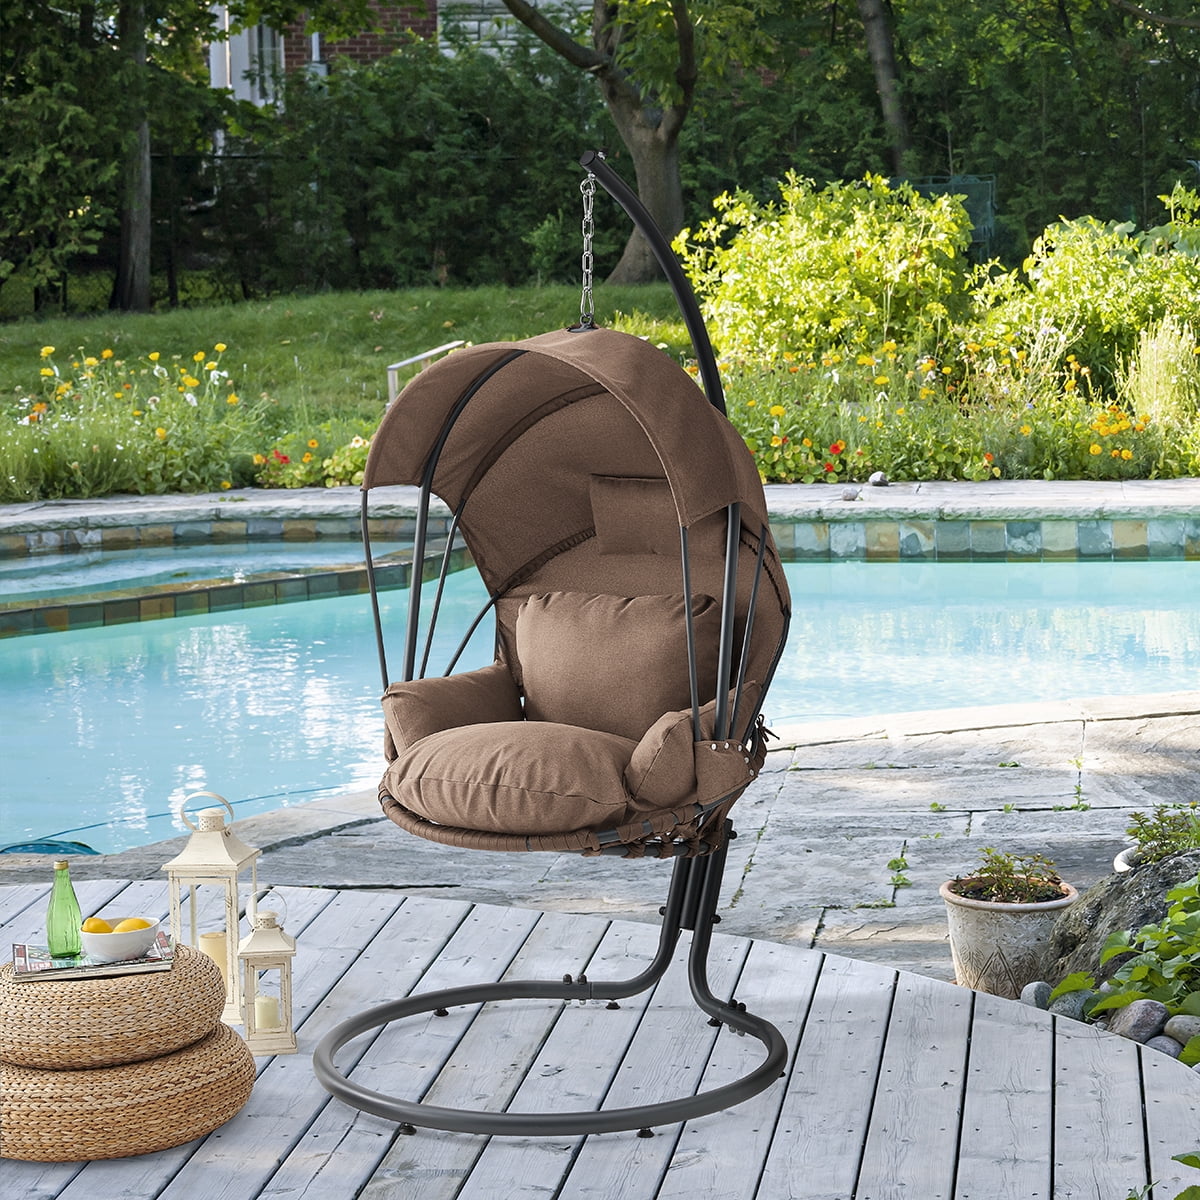 New Household Patio Decor Hanging Swing Egg Chair Cushion Washable Seat Mat PGS 